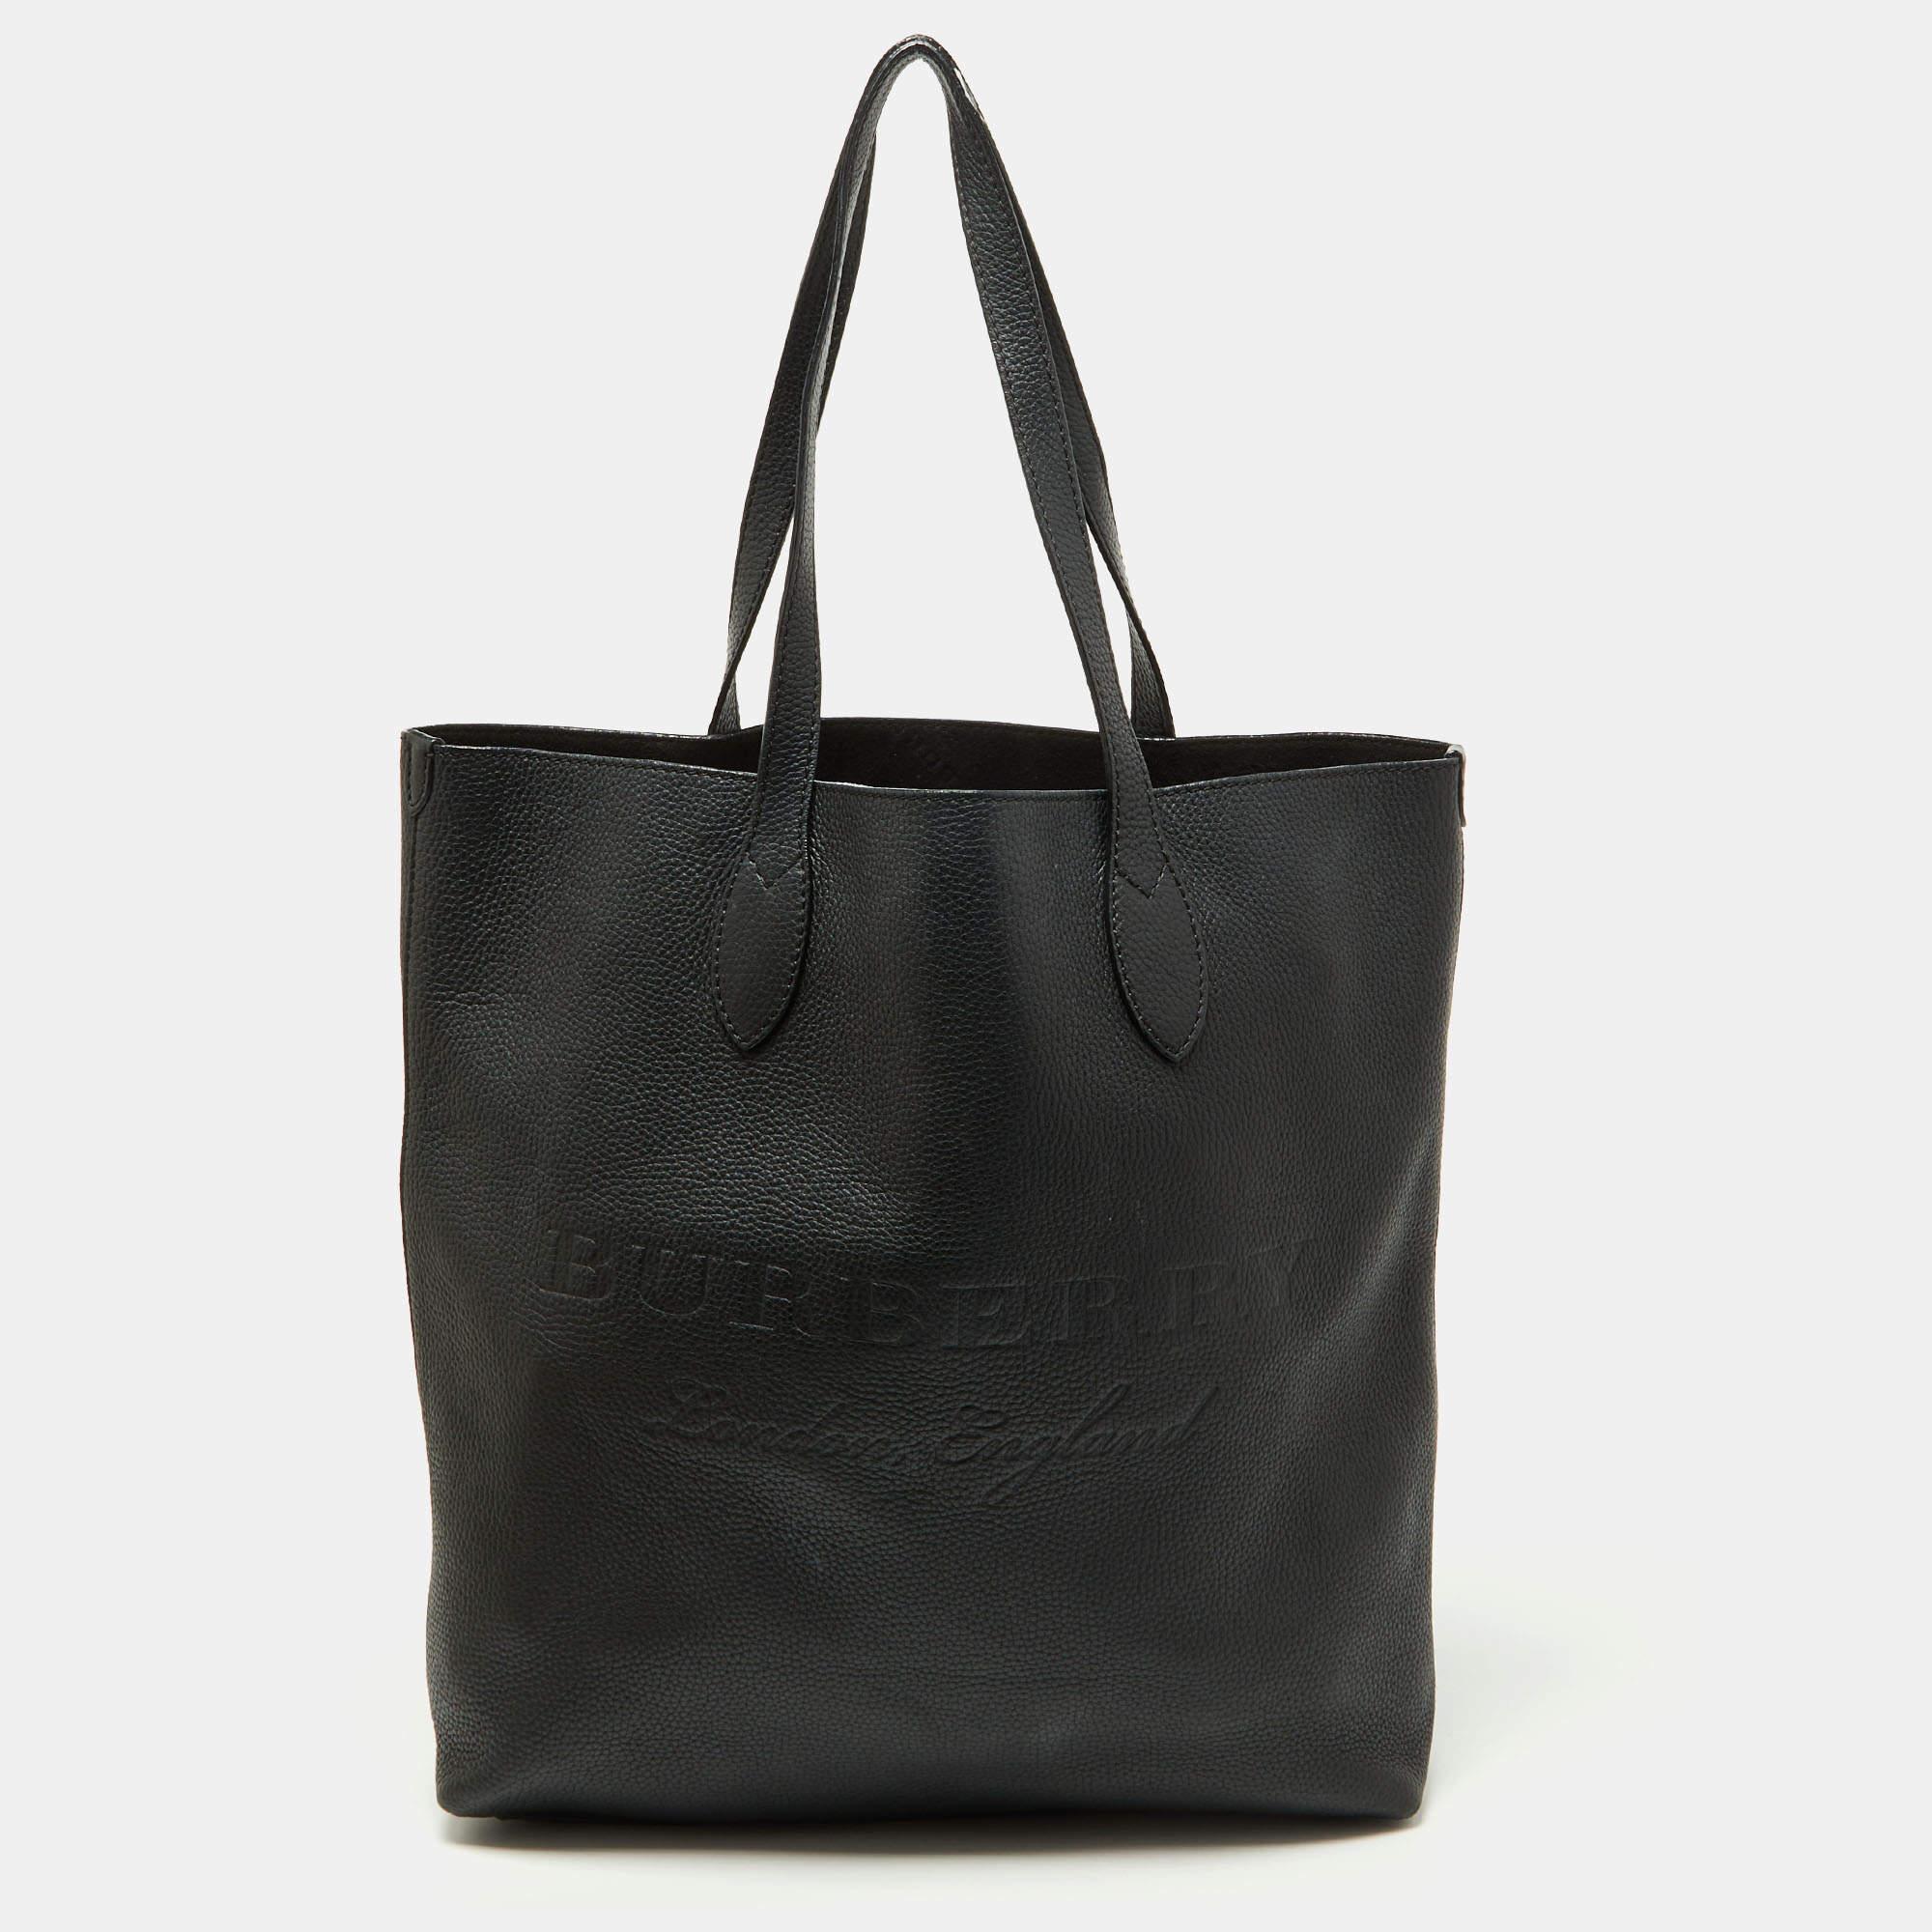 Spacious, durable, stylish — Burberry's Remington shopper tote is a fine example of what an everyday bag should be. This designer tote is crafted using black leather and added with two flat handles, a spacious interior, and front logo detail.

